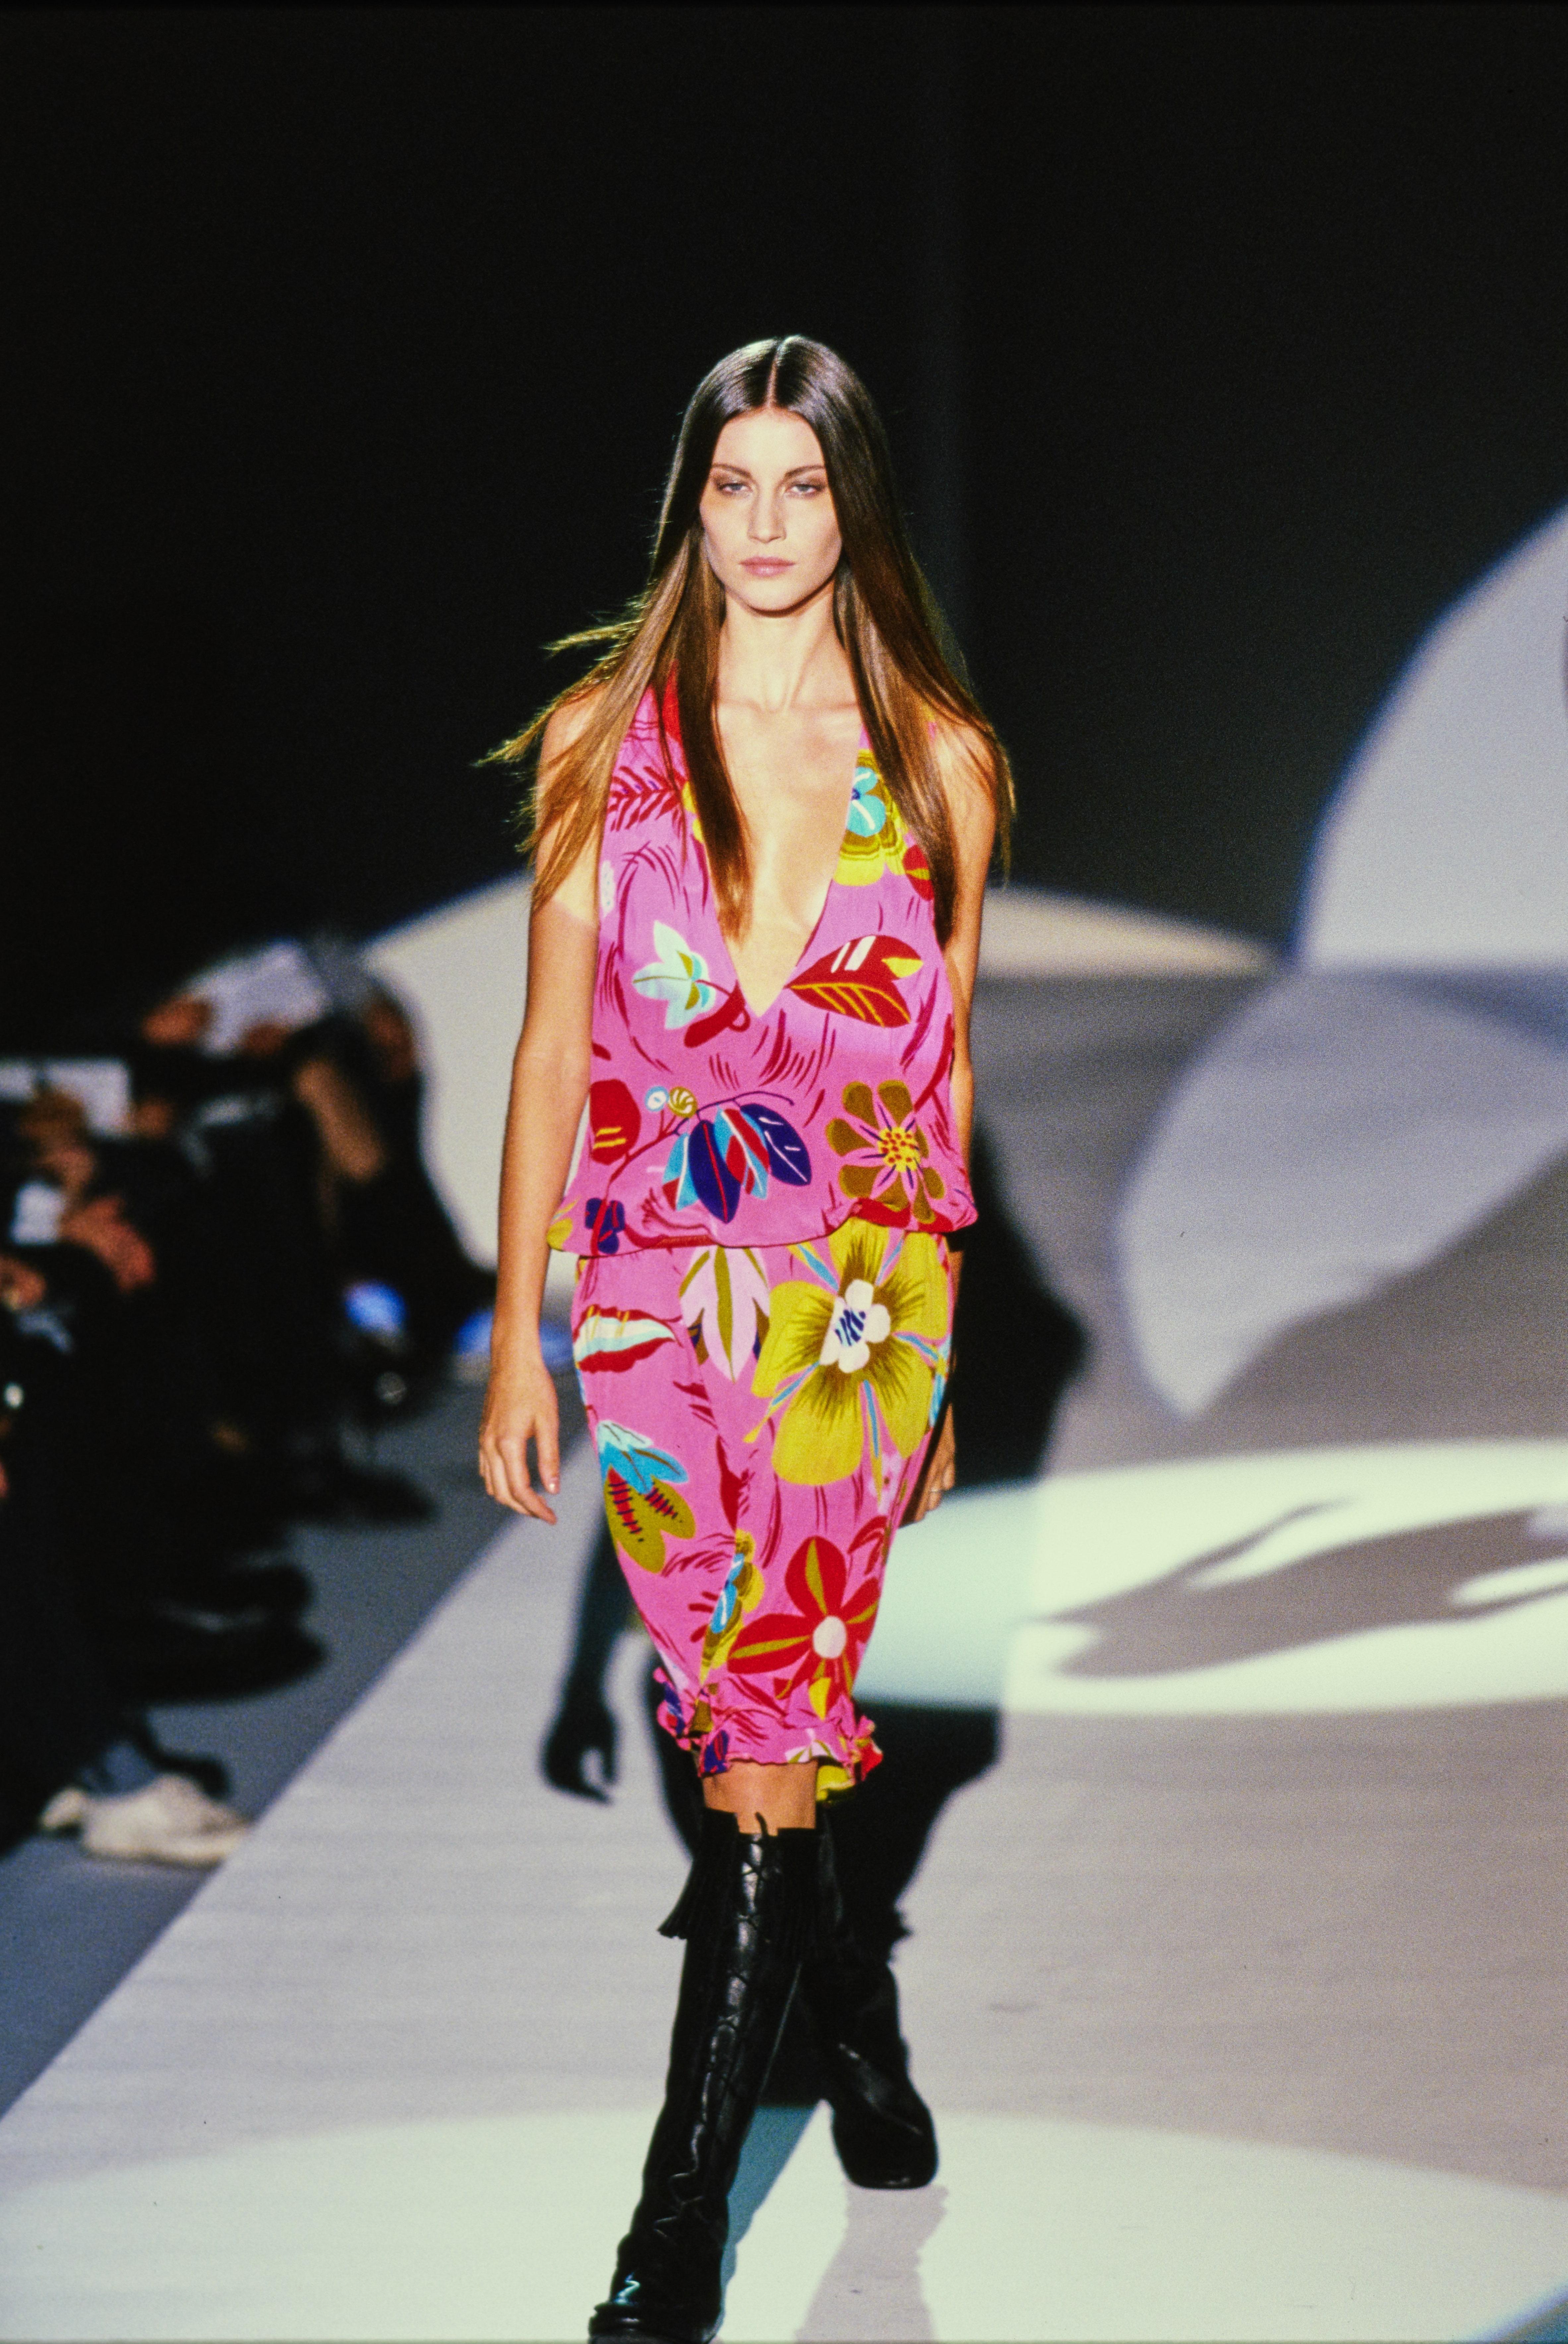 Presenting a colorful psychedelic bag from Tom Ford's famous 'Las Vegas hippy' collection with Gucci. The S/S 1999 collection is remembered for its drastic departure from Tom Ford's signature sleek minimalism. After the success of his earlier